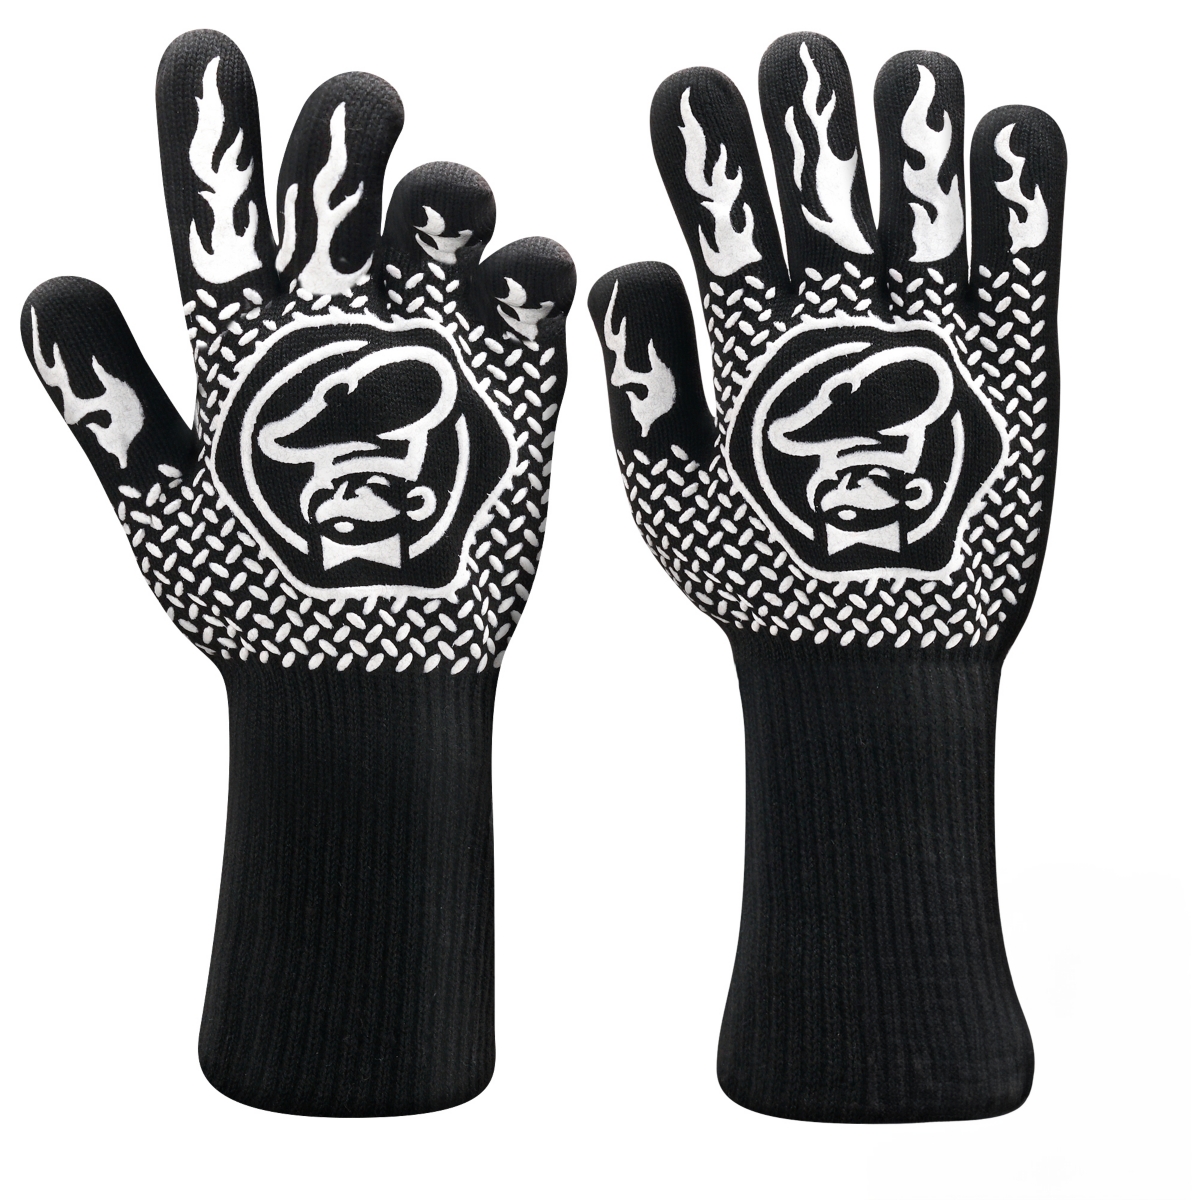 Heat Resistant Thick Aramid Fiber Oven Mitts with Non-Slip Grip - Resistant up to 1472°F - Black